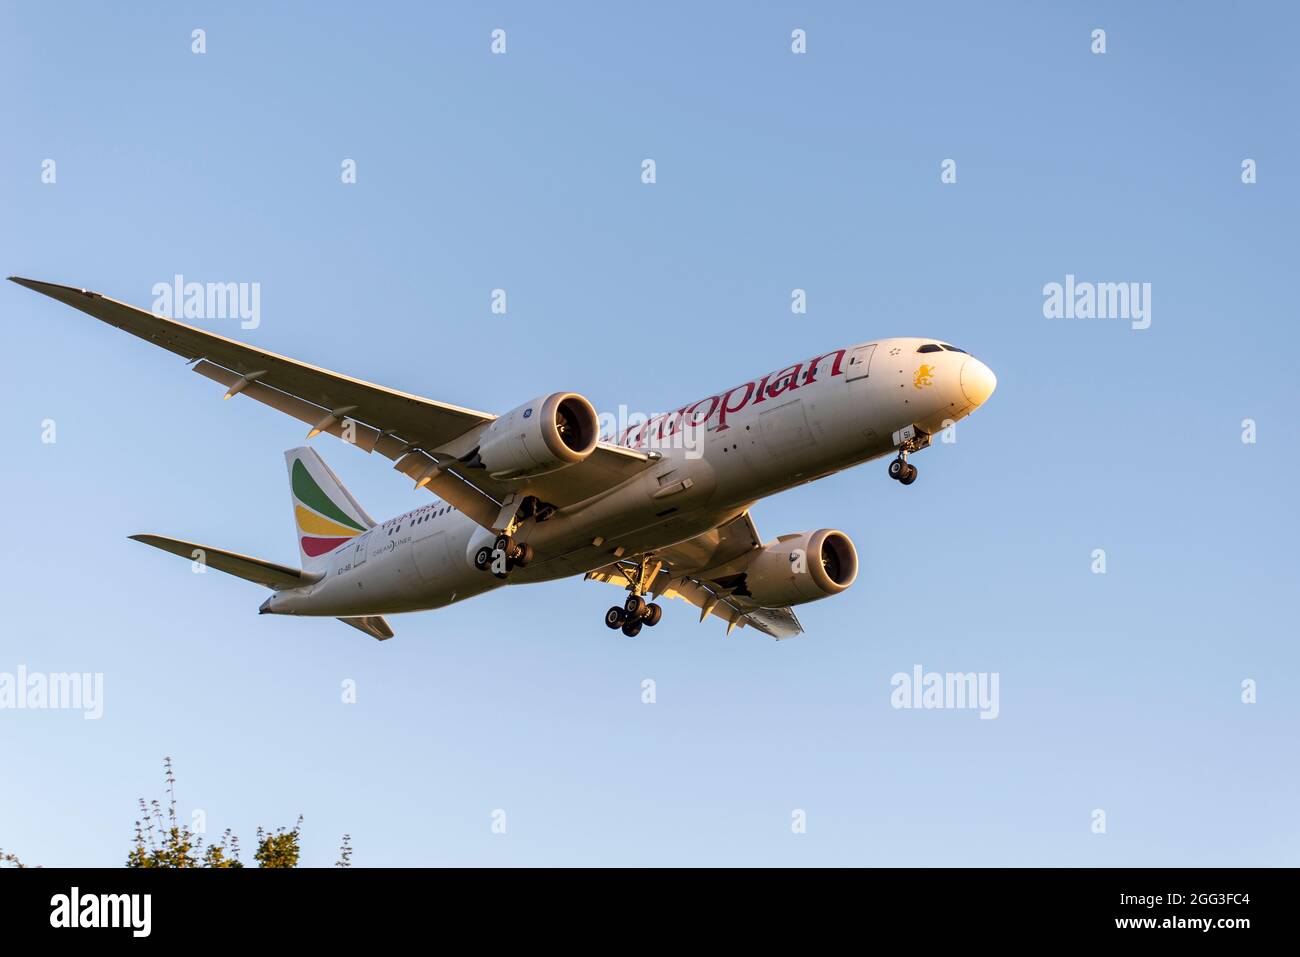 Ethiopian Airlines Boeing 787 Dreamliner airliner jet plane ET-ASI landing at London Heathrow Airport, UK early in the morning in blue sky Stock Photo